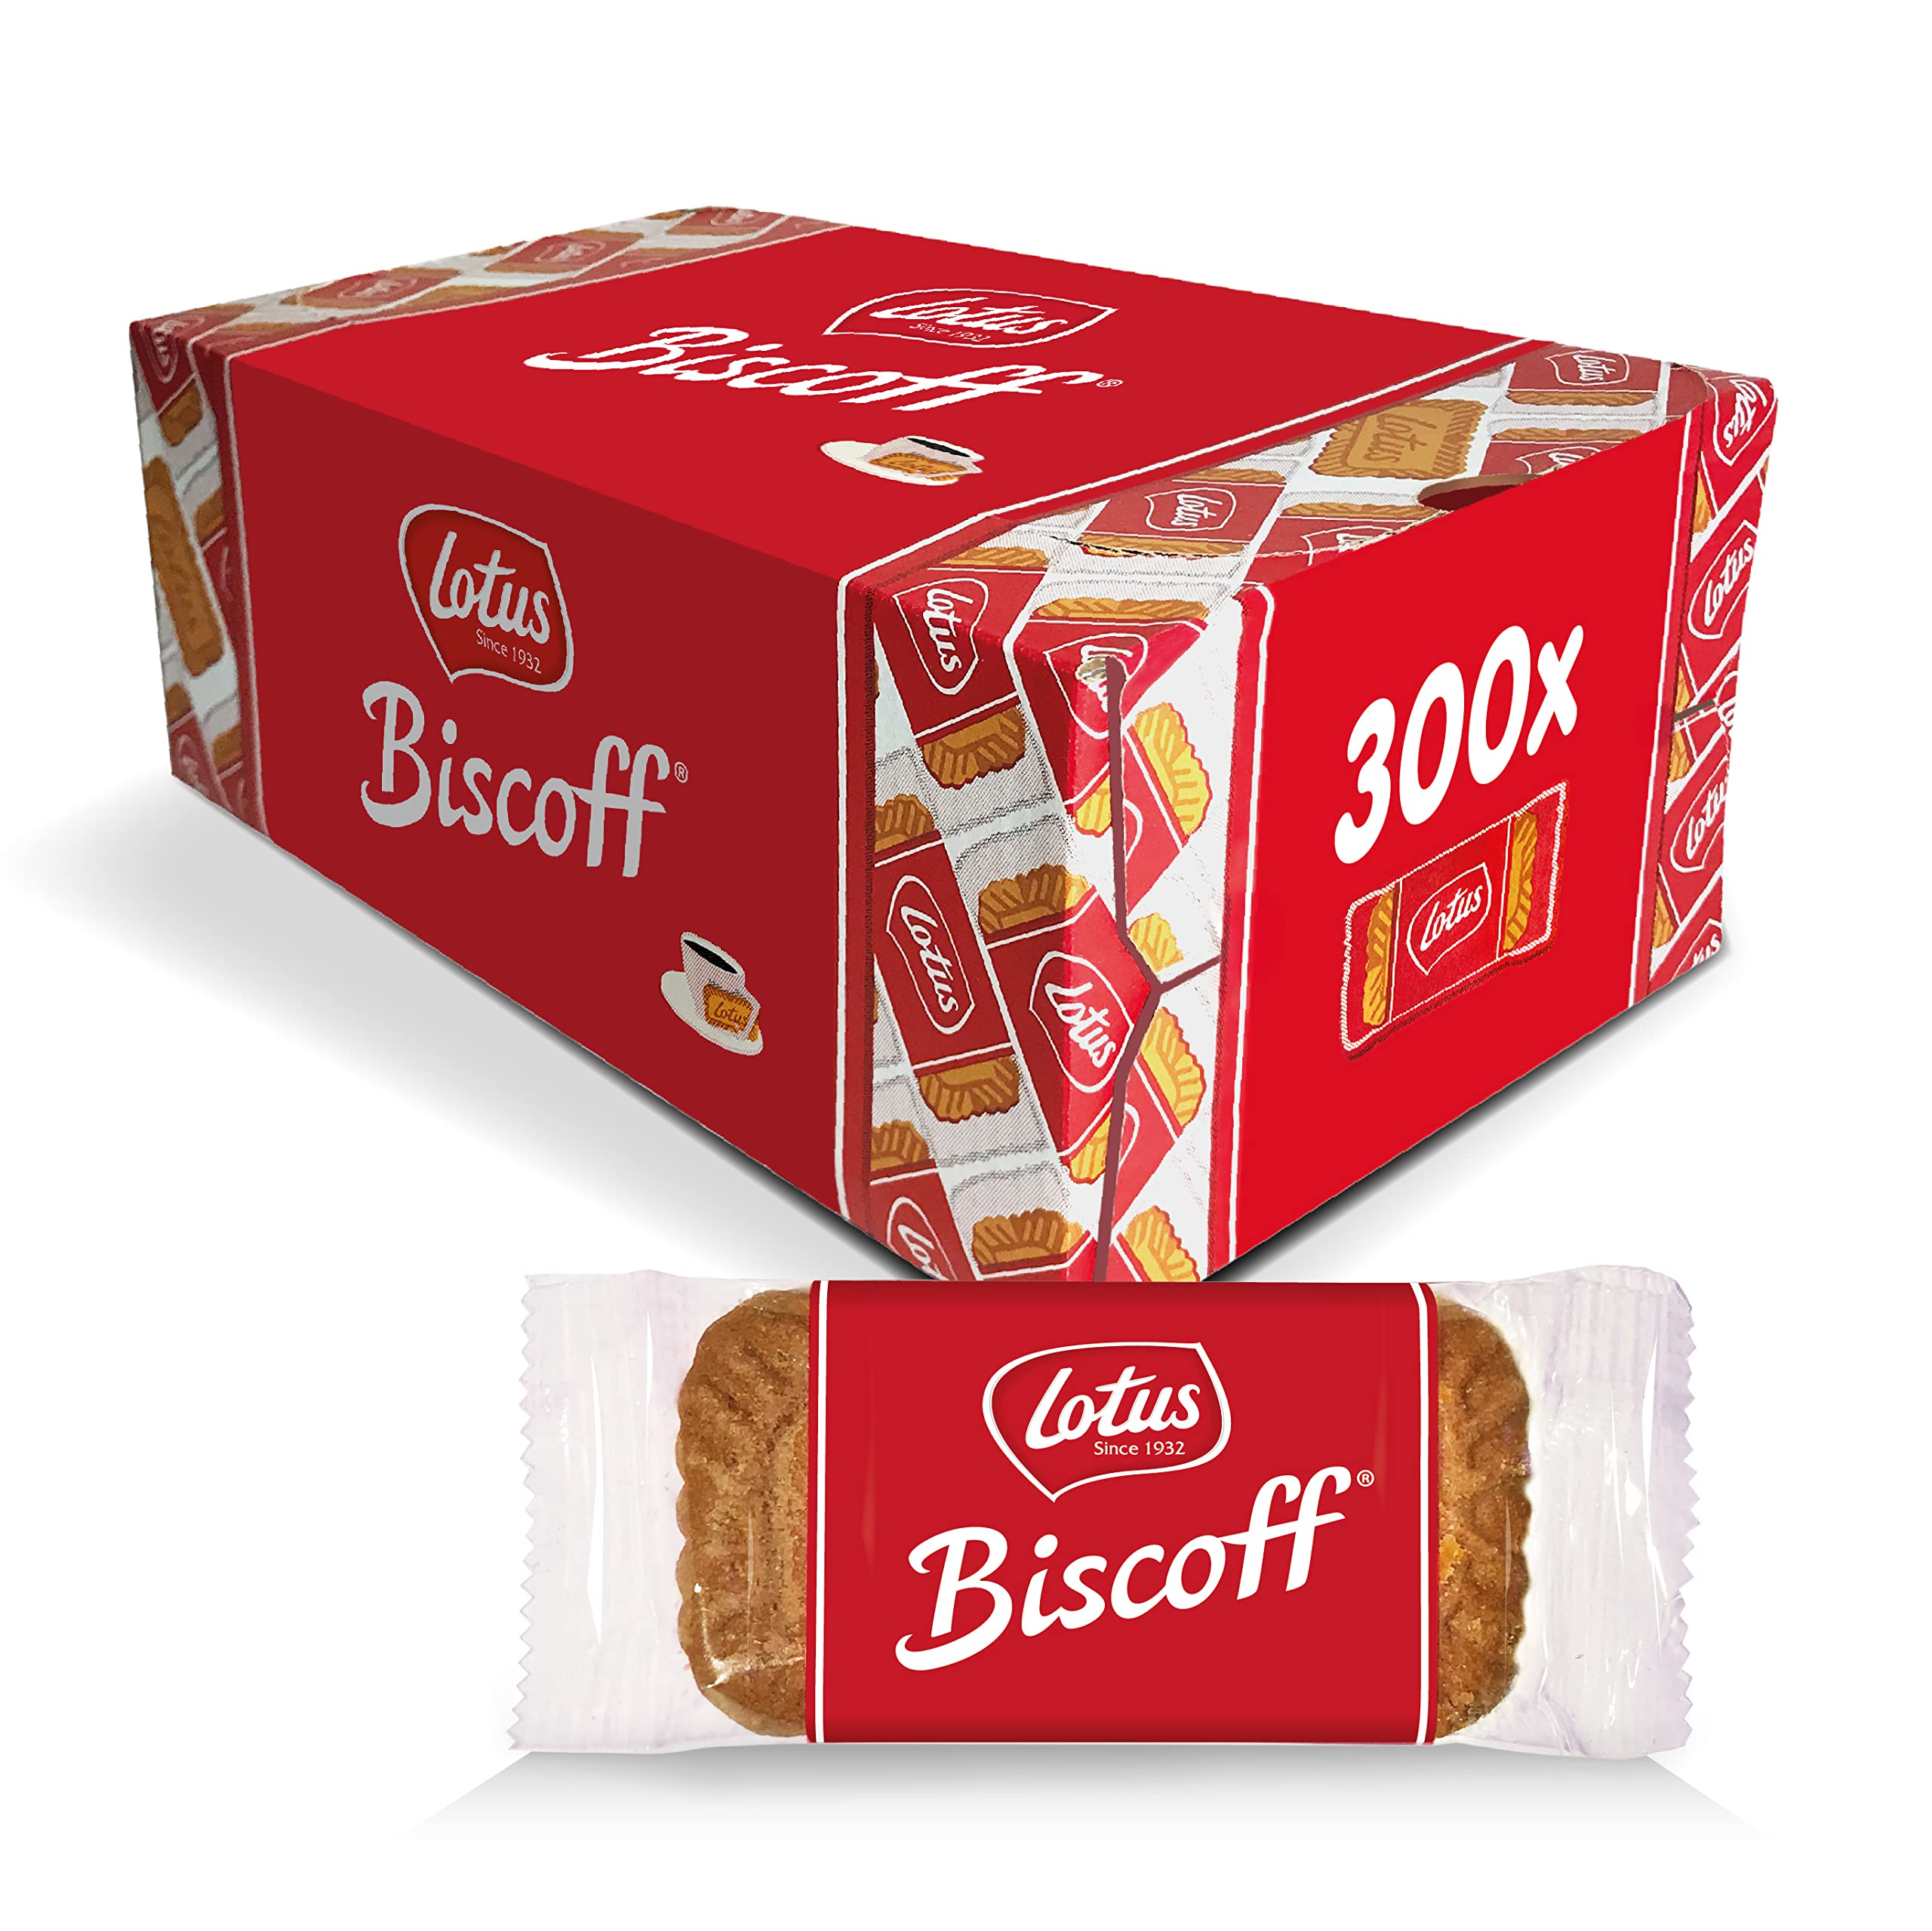 Lotus Biscoff Cookies Caramelized Biscuit Cookies 300 Cookies Individually  Wrapped Vegan,0.2 Ounce (Pack of 300)